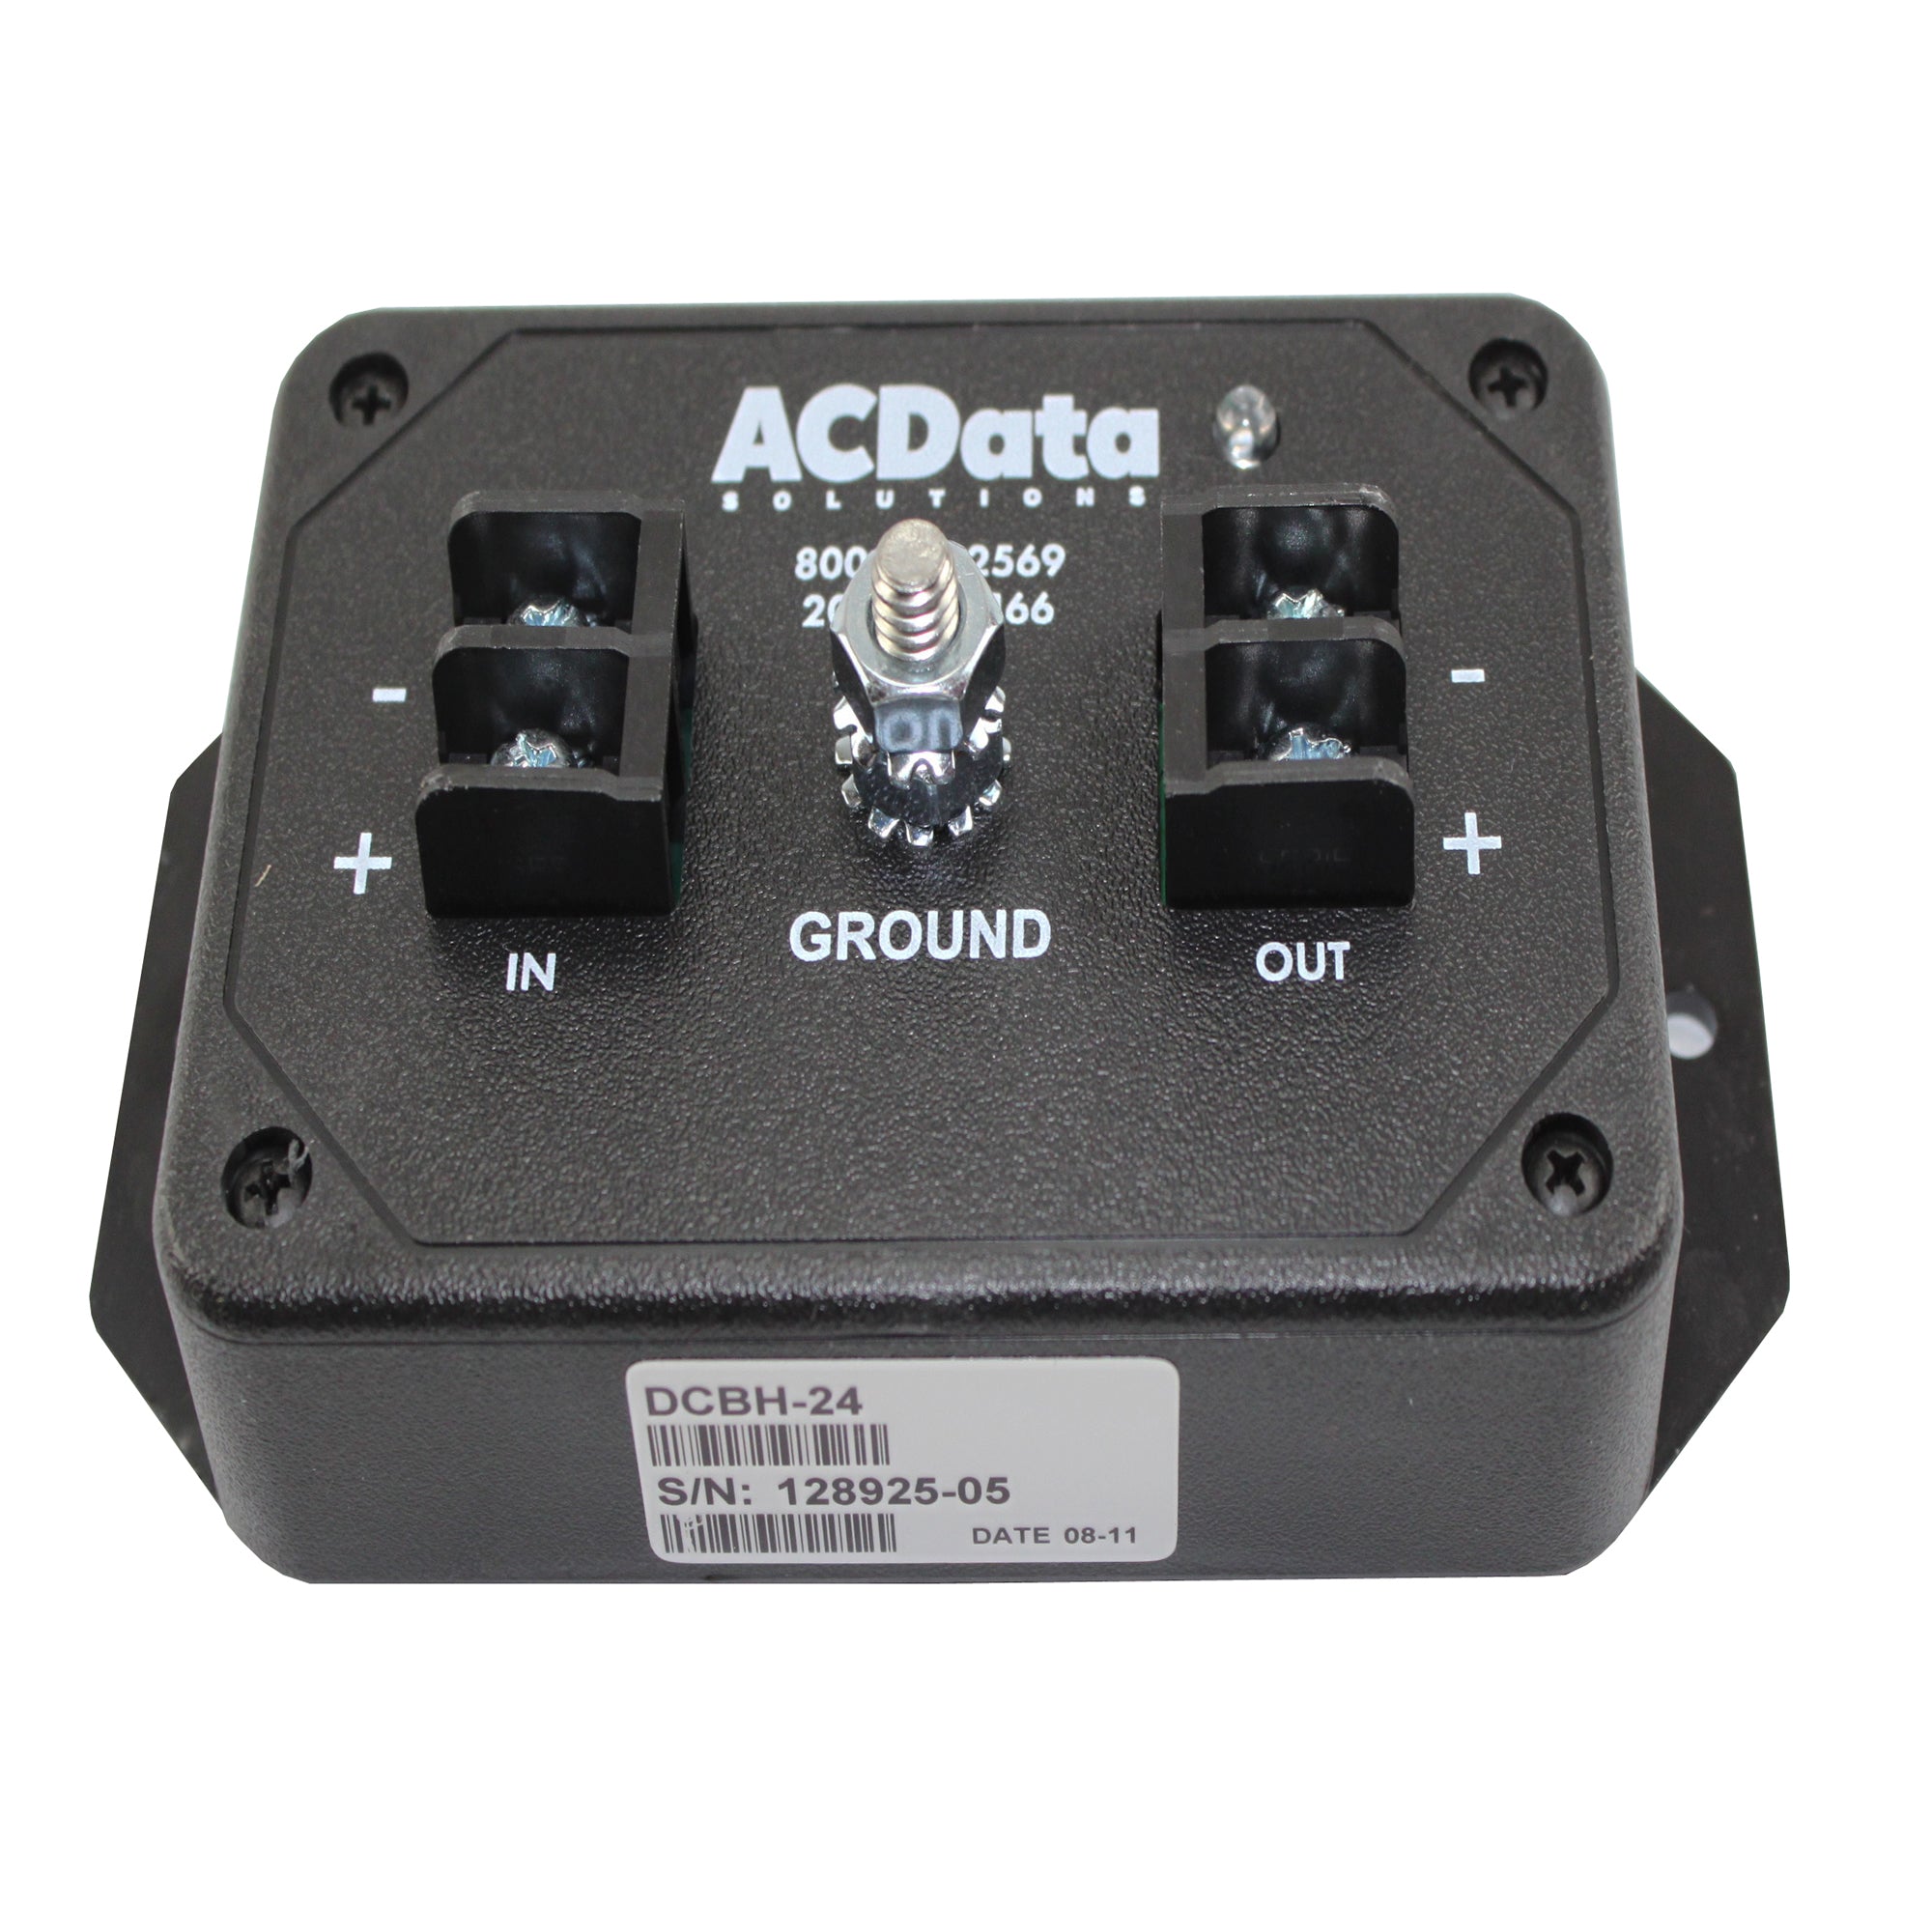 ACD Data, ACDATA DCBH-24 DC POWER AND SIGNAL PROTECTOR - BLACK